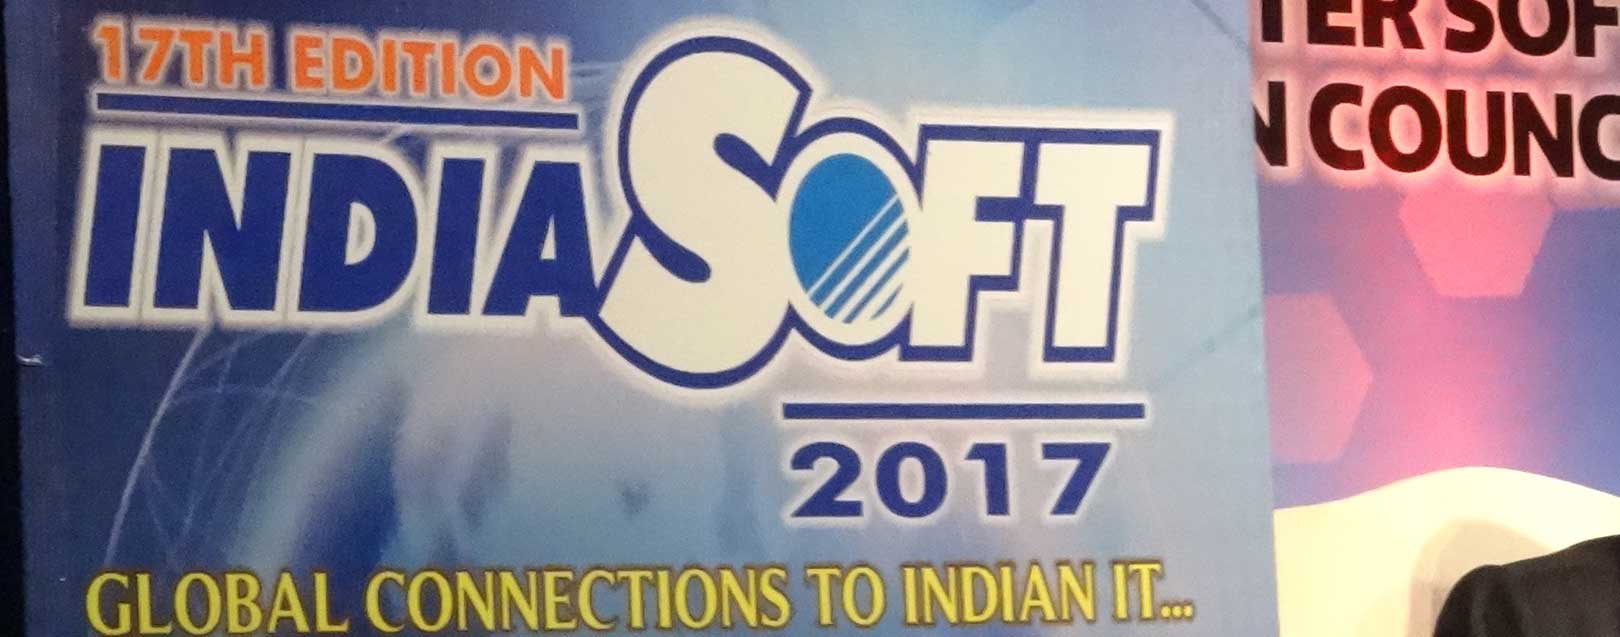 IndiaSoft 2017: connecting Indian IT with global buyers